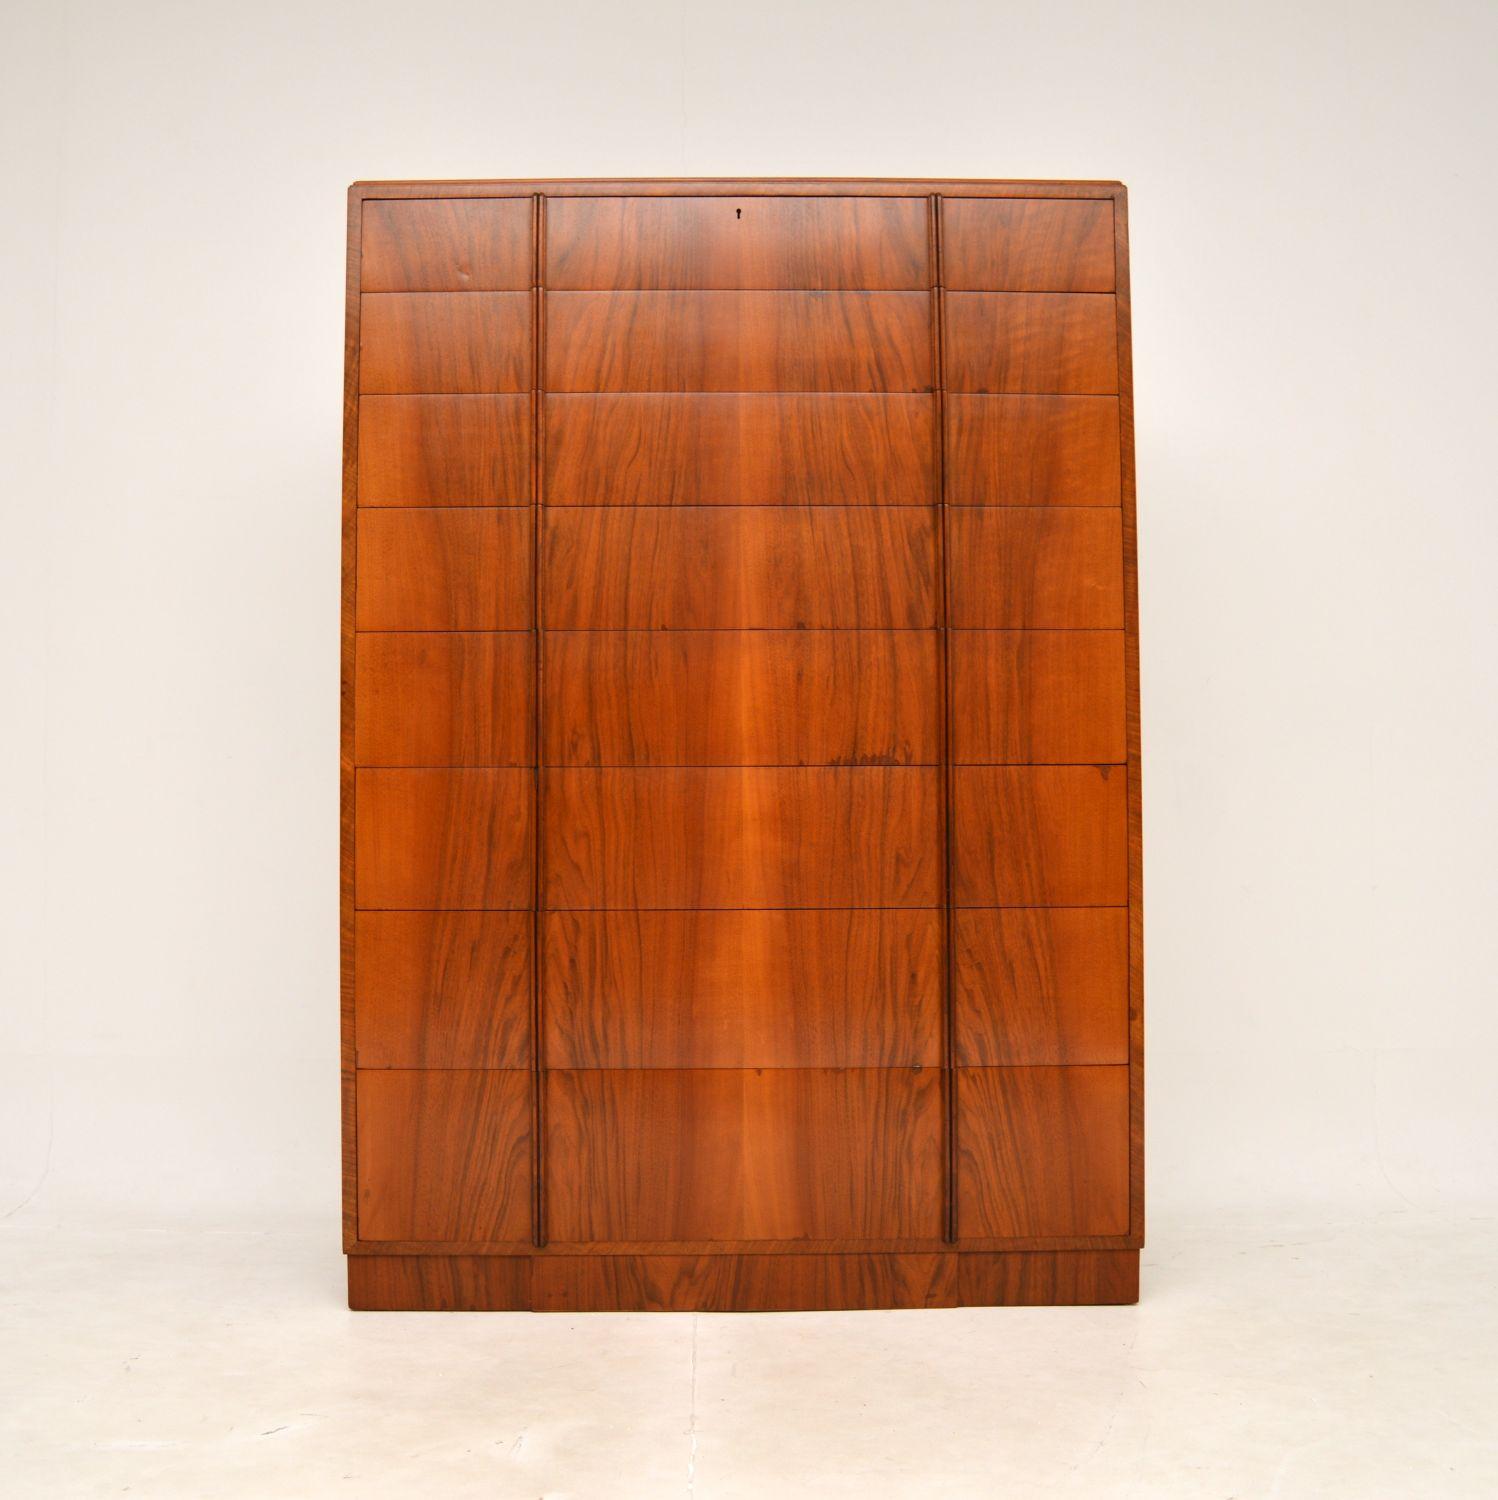 A stunning and very large Art Deco figured walnut chest of drawers. This was made in England, it dates from around the 1920-30’s.

This is one of the largest Art Deco chests we have ever seen, there is a huge amount of storage space in the eight